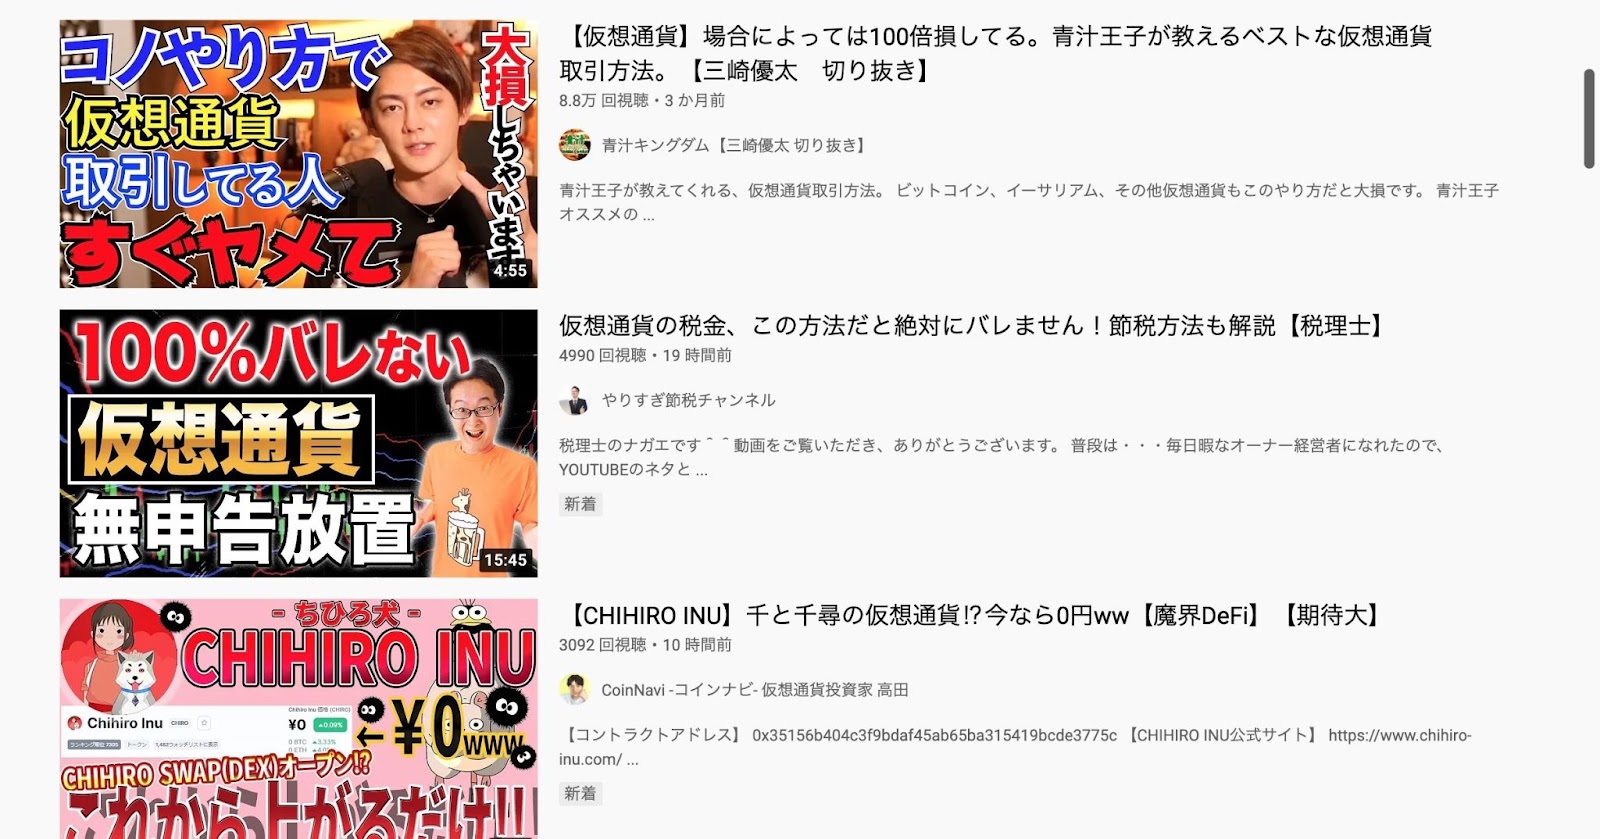 YouTubeで「仮想通貨」と検索した時の画面